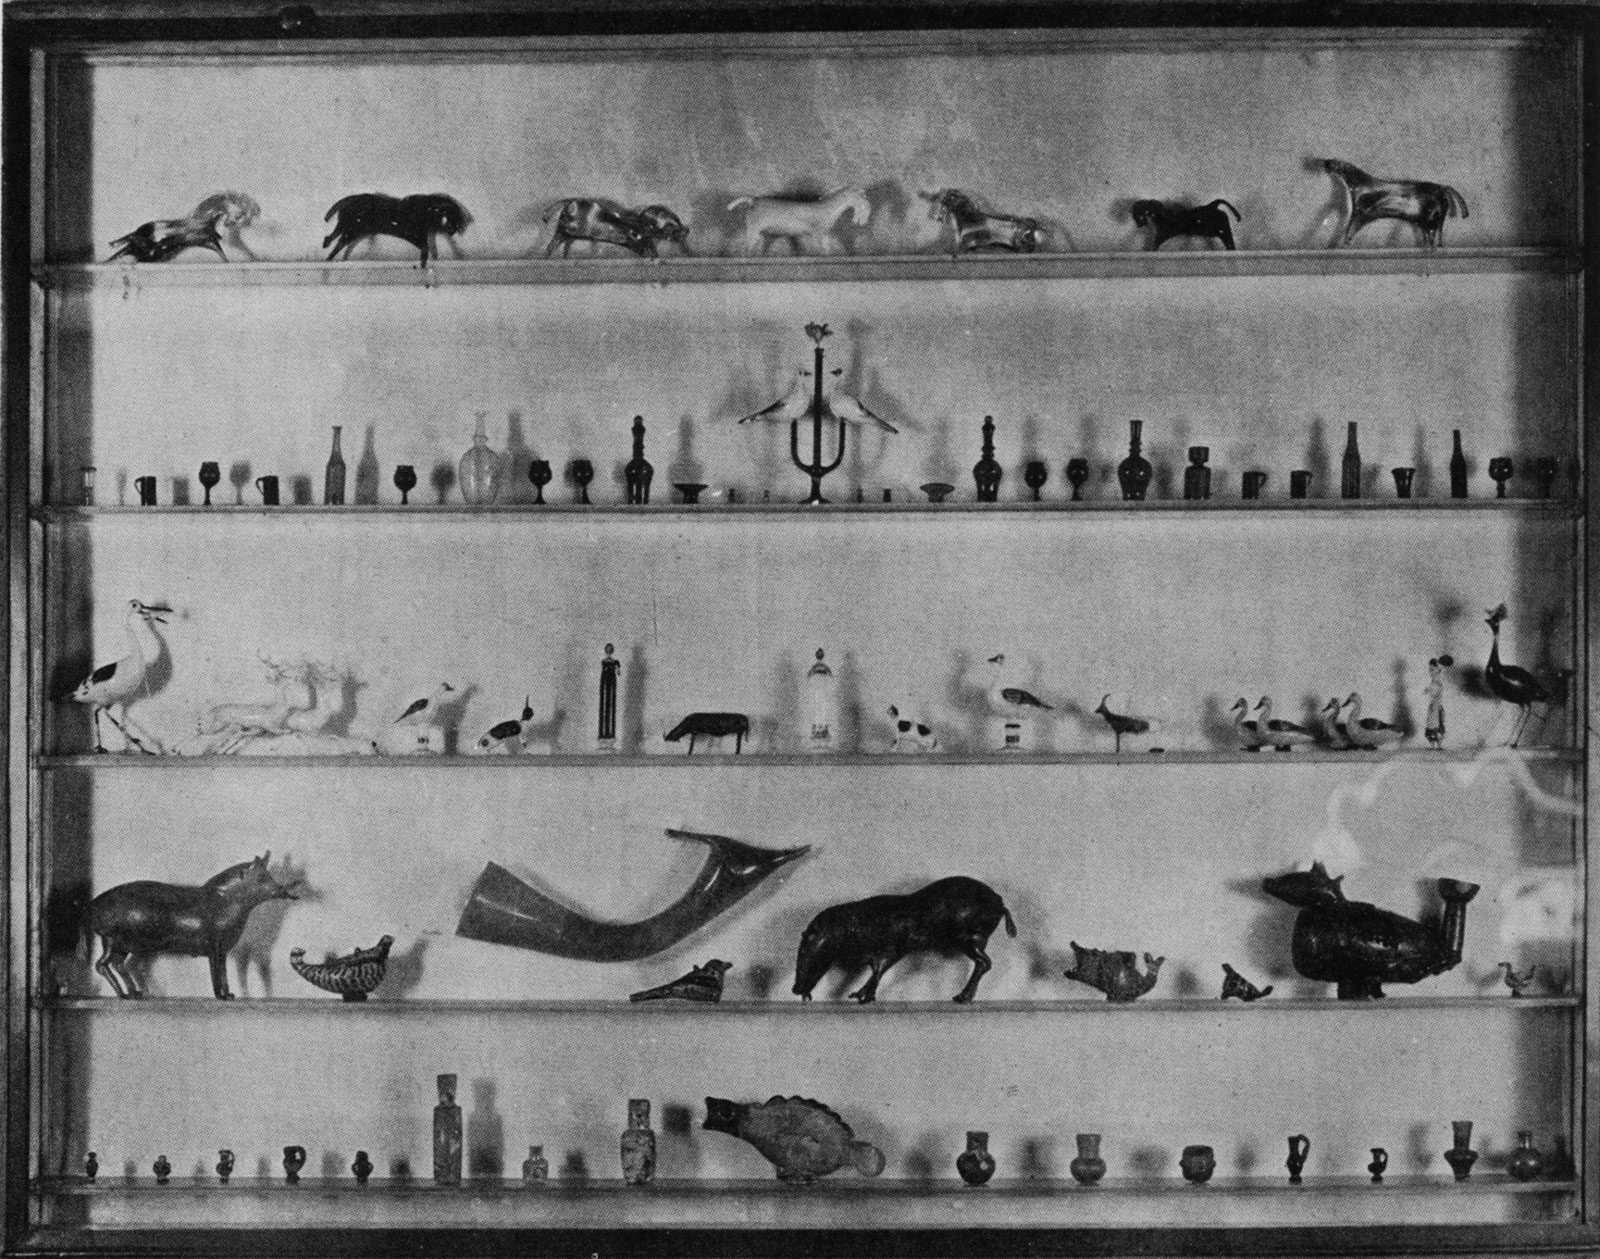 Glass shelves displaying glass objects, in the dining room of the Nadelmans' New York townhouse, 1925